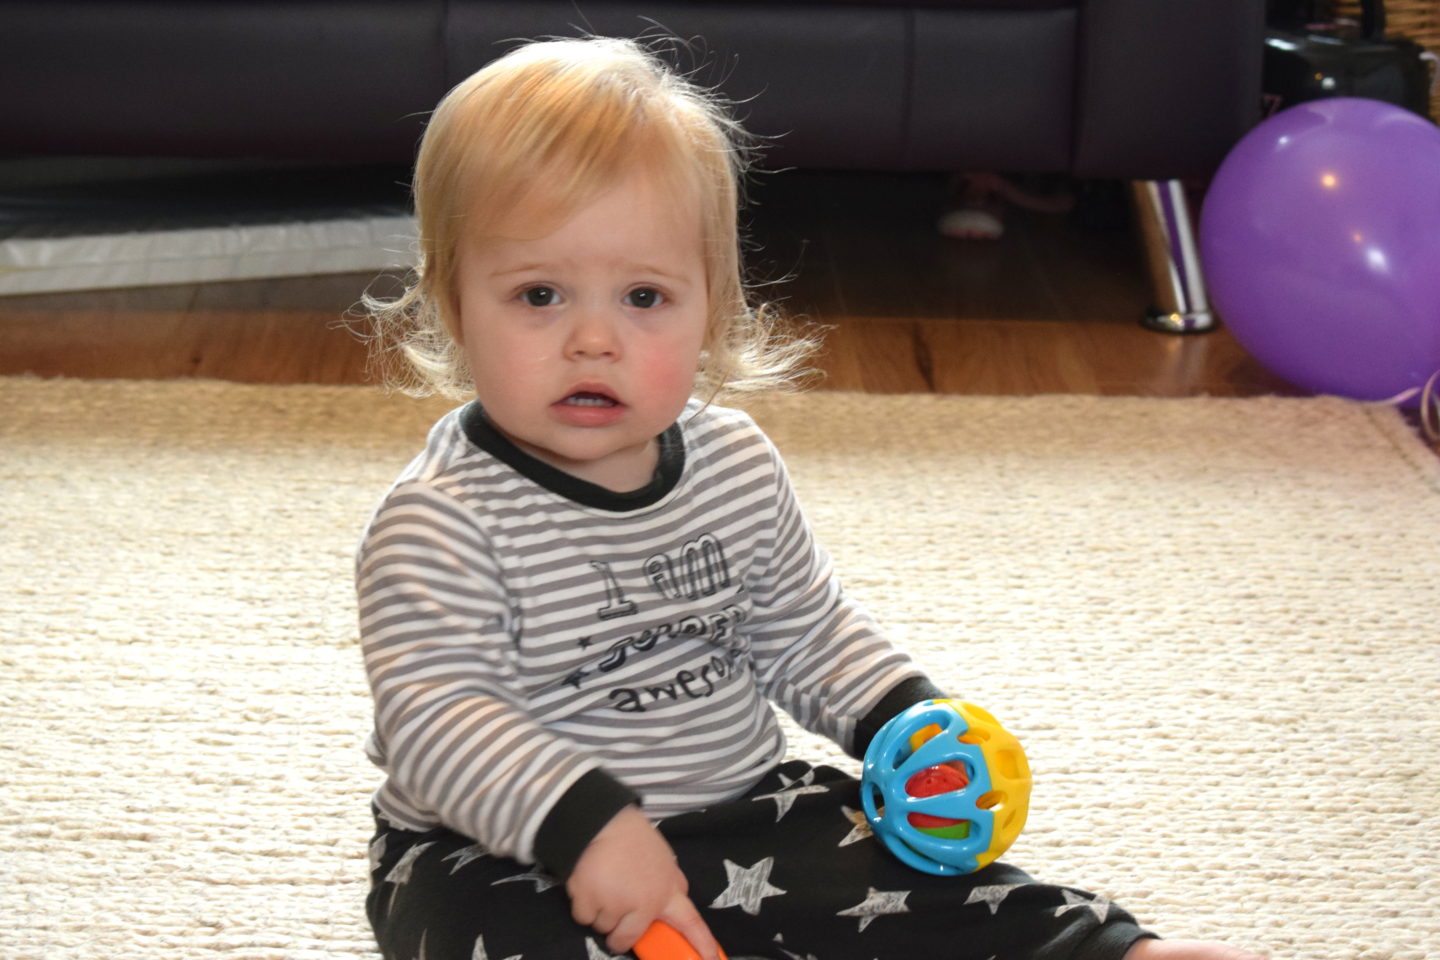 one year old girl in pyjamas, sitting on a rug, holding a ball